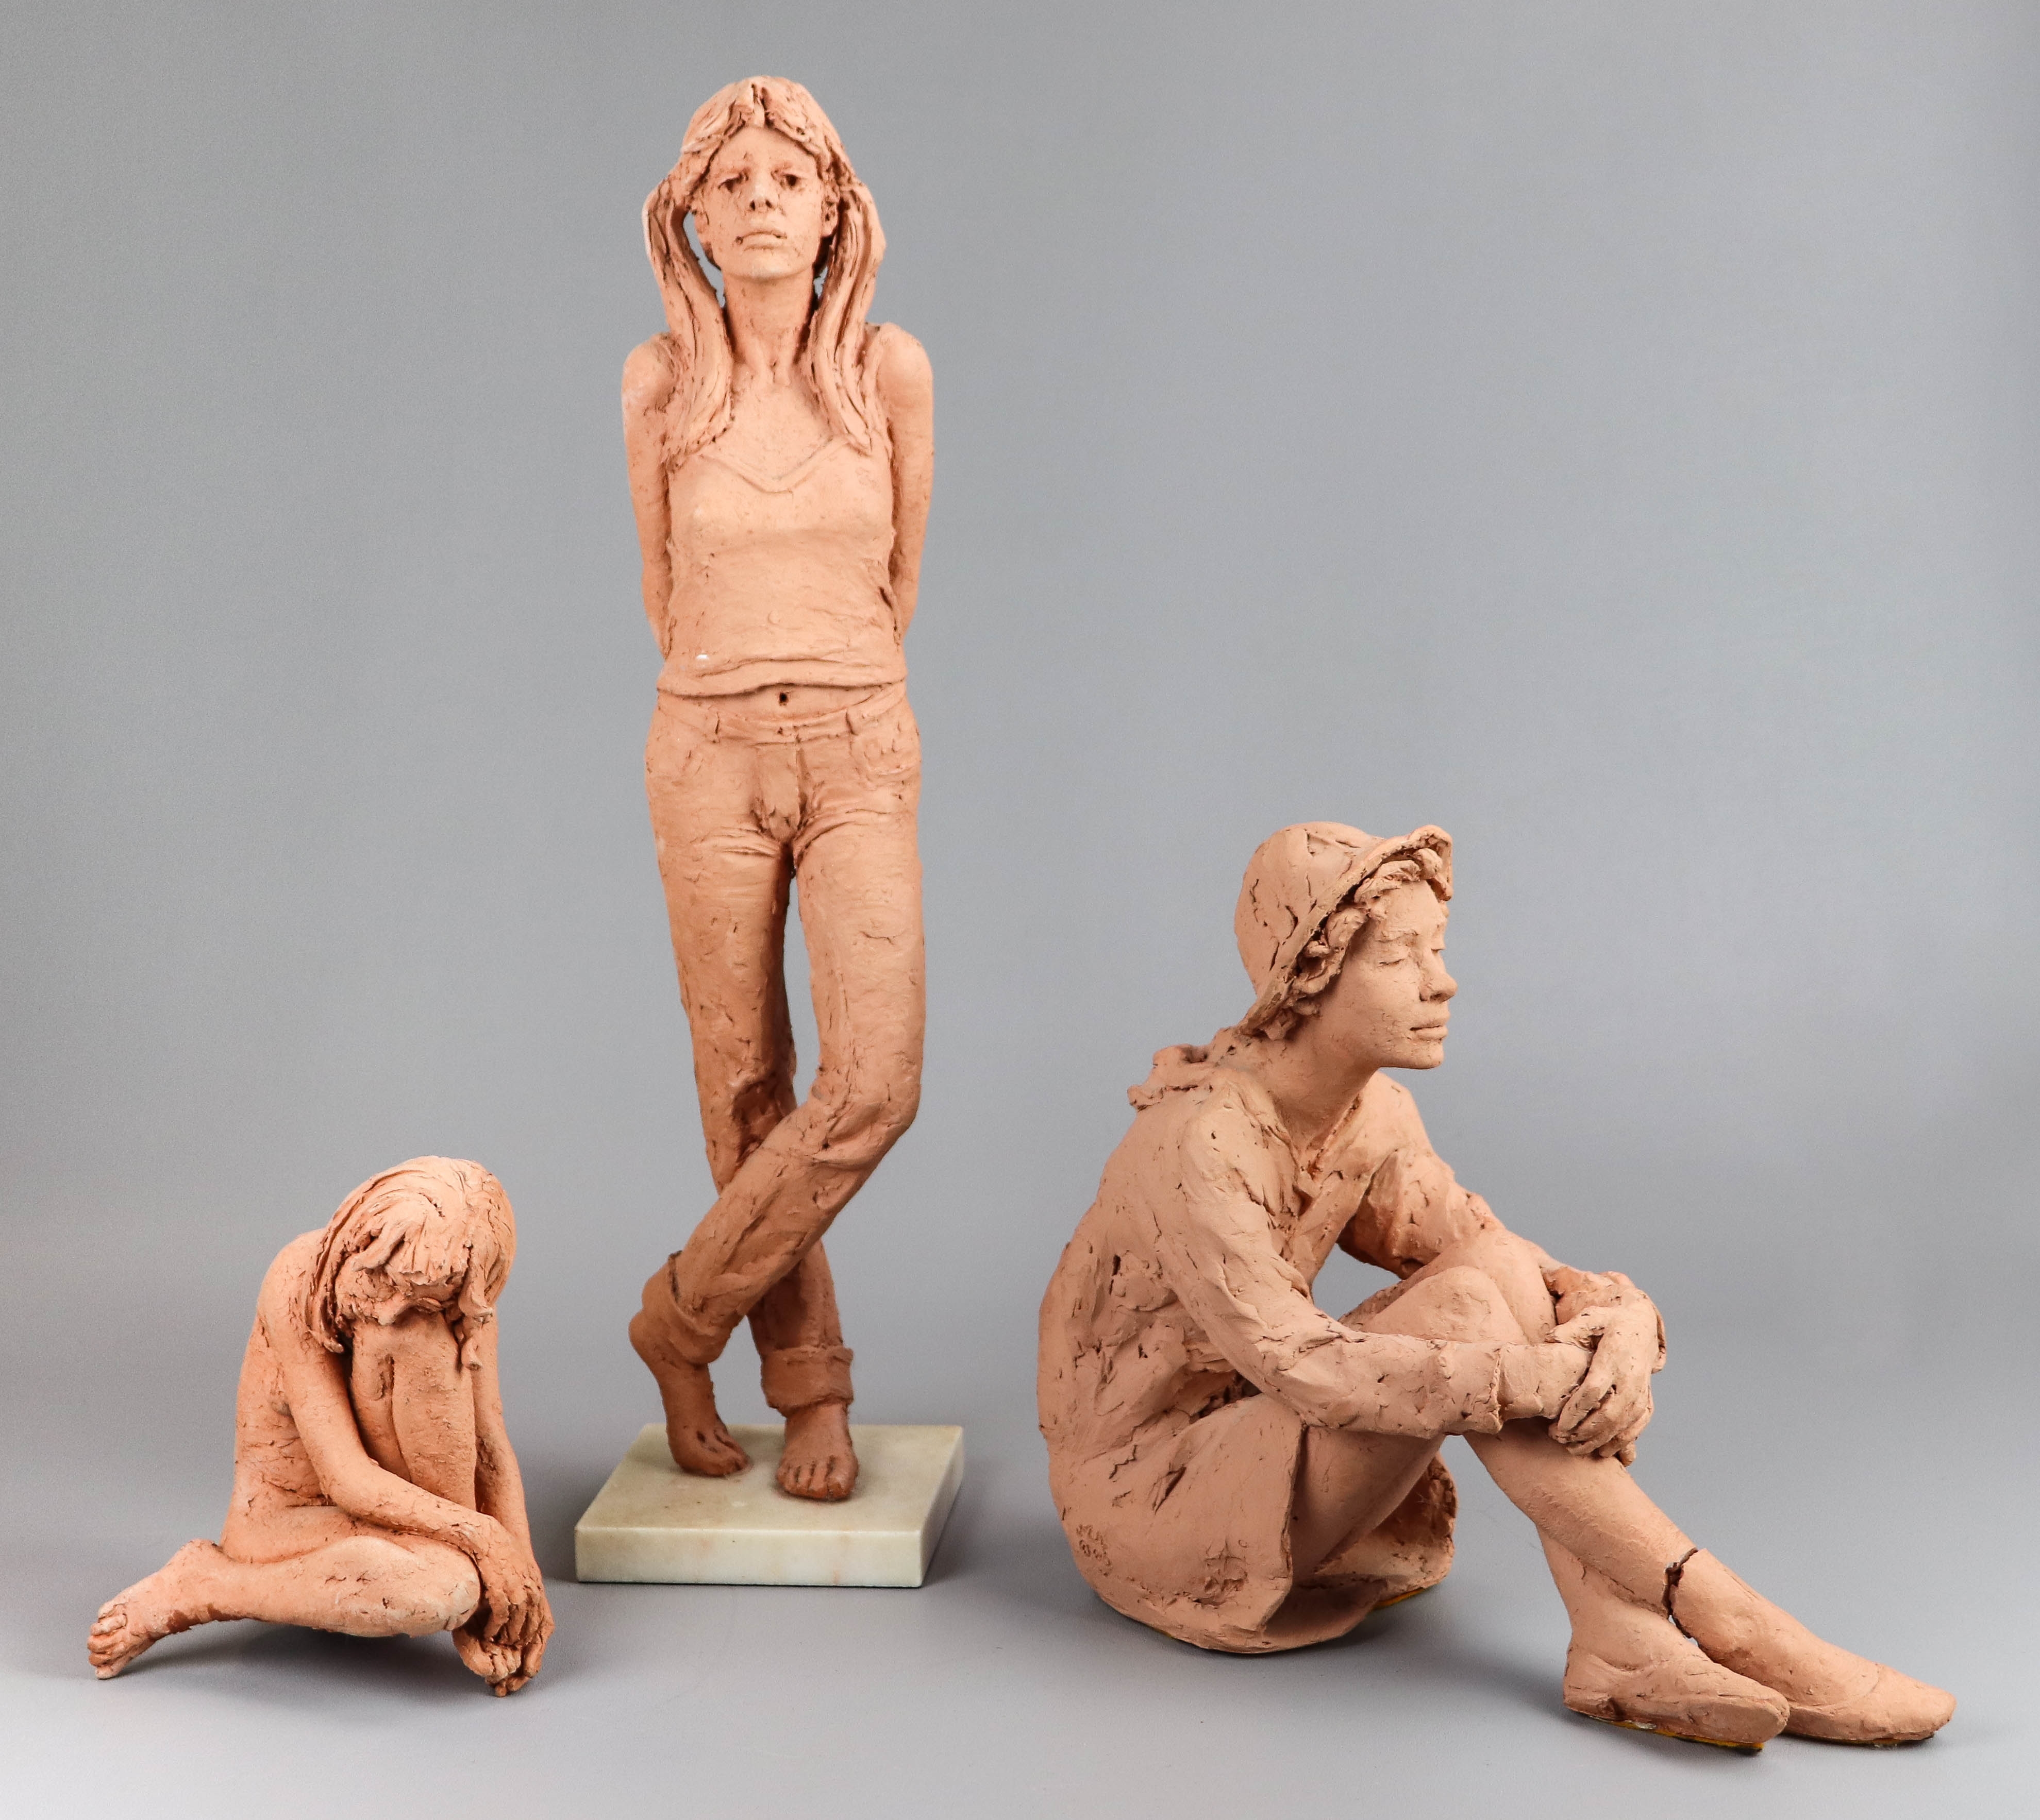 Jess Miller: Painted Clay Sculptures of the Figure - Jackson's Art Blog